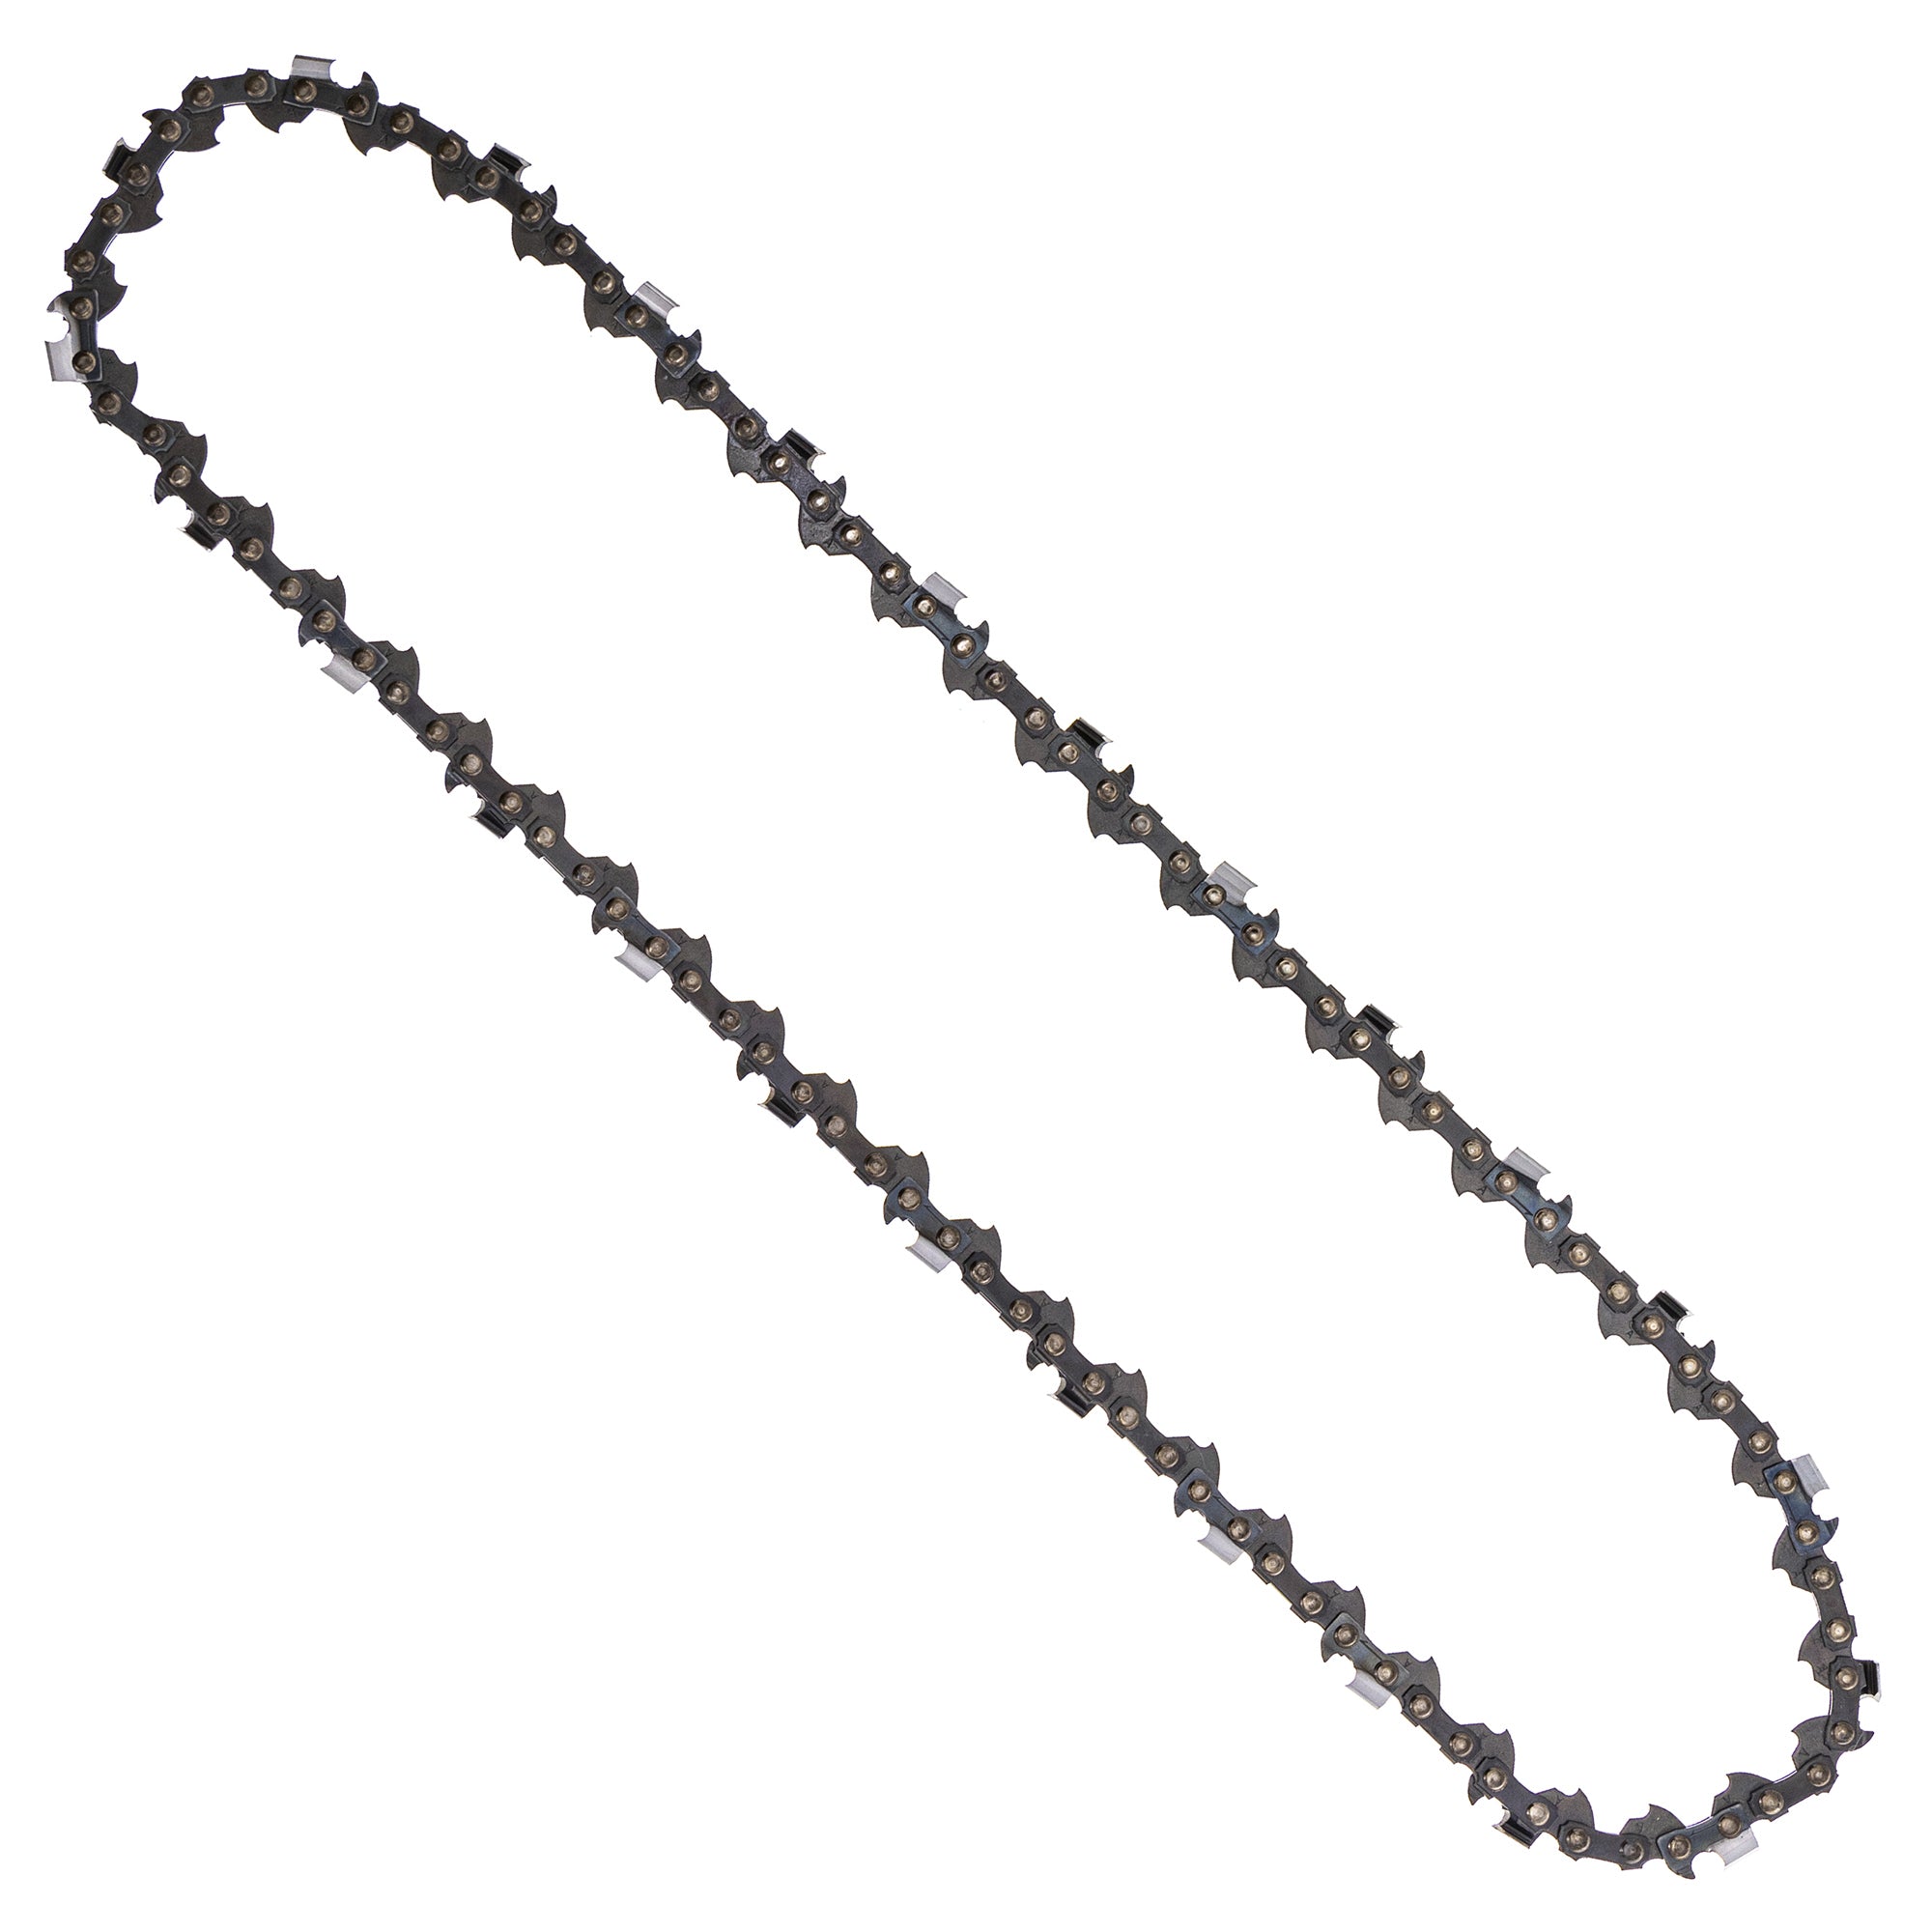 8TEN 810-CCC2234H Chain 6-Pack for zOTHER Stens Oregon Husqvarna